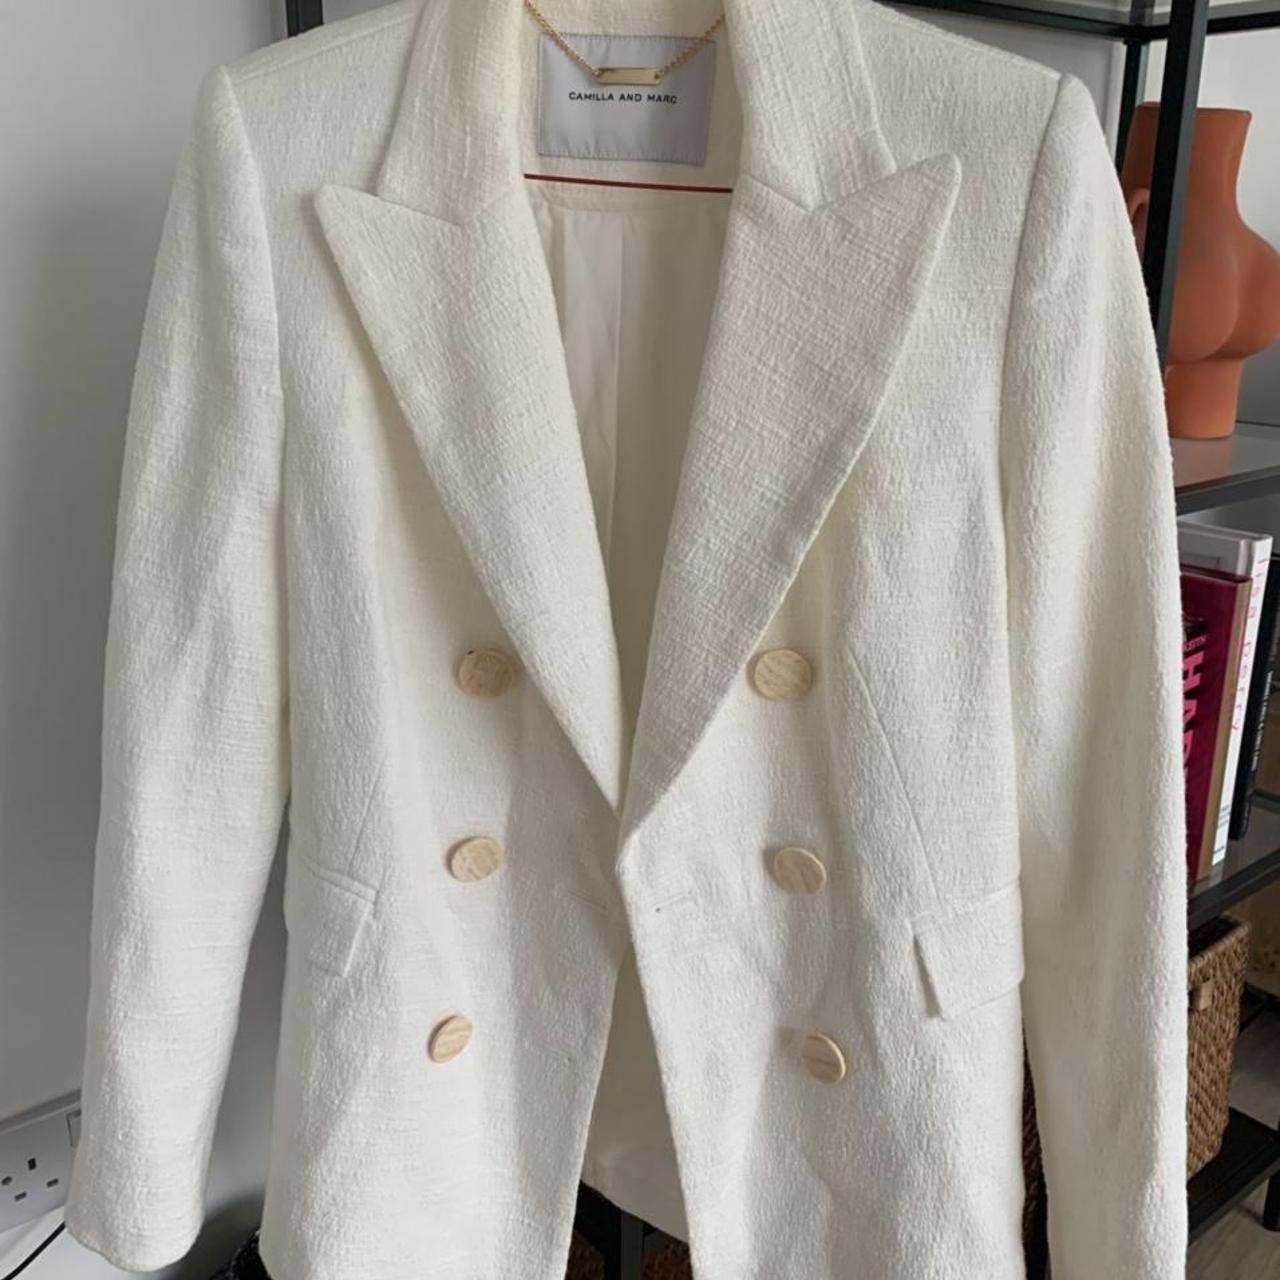 Camilla & Marc white bicycle blazer Uk:8 but fits a... - Depop